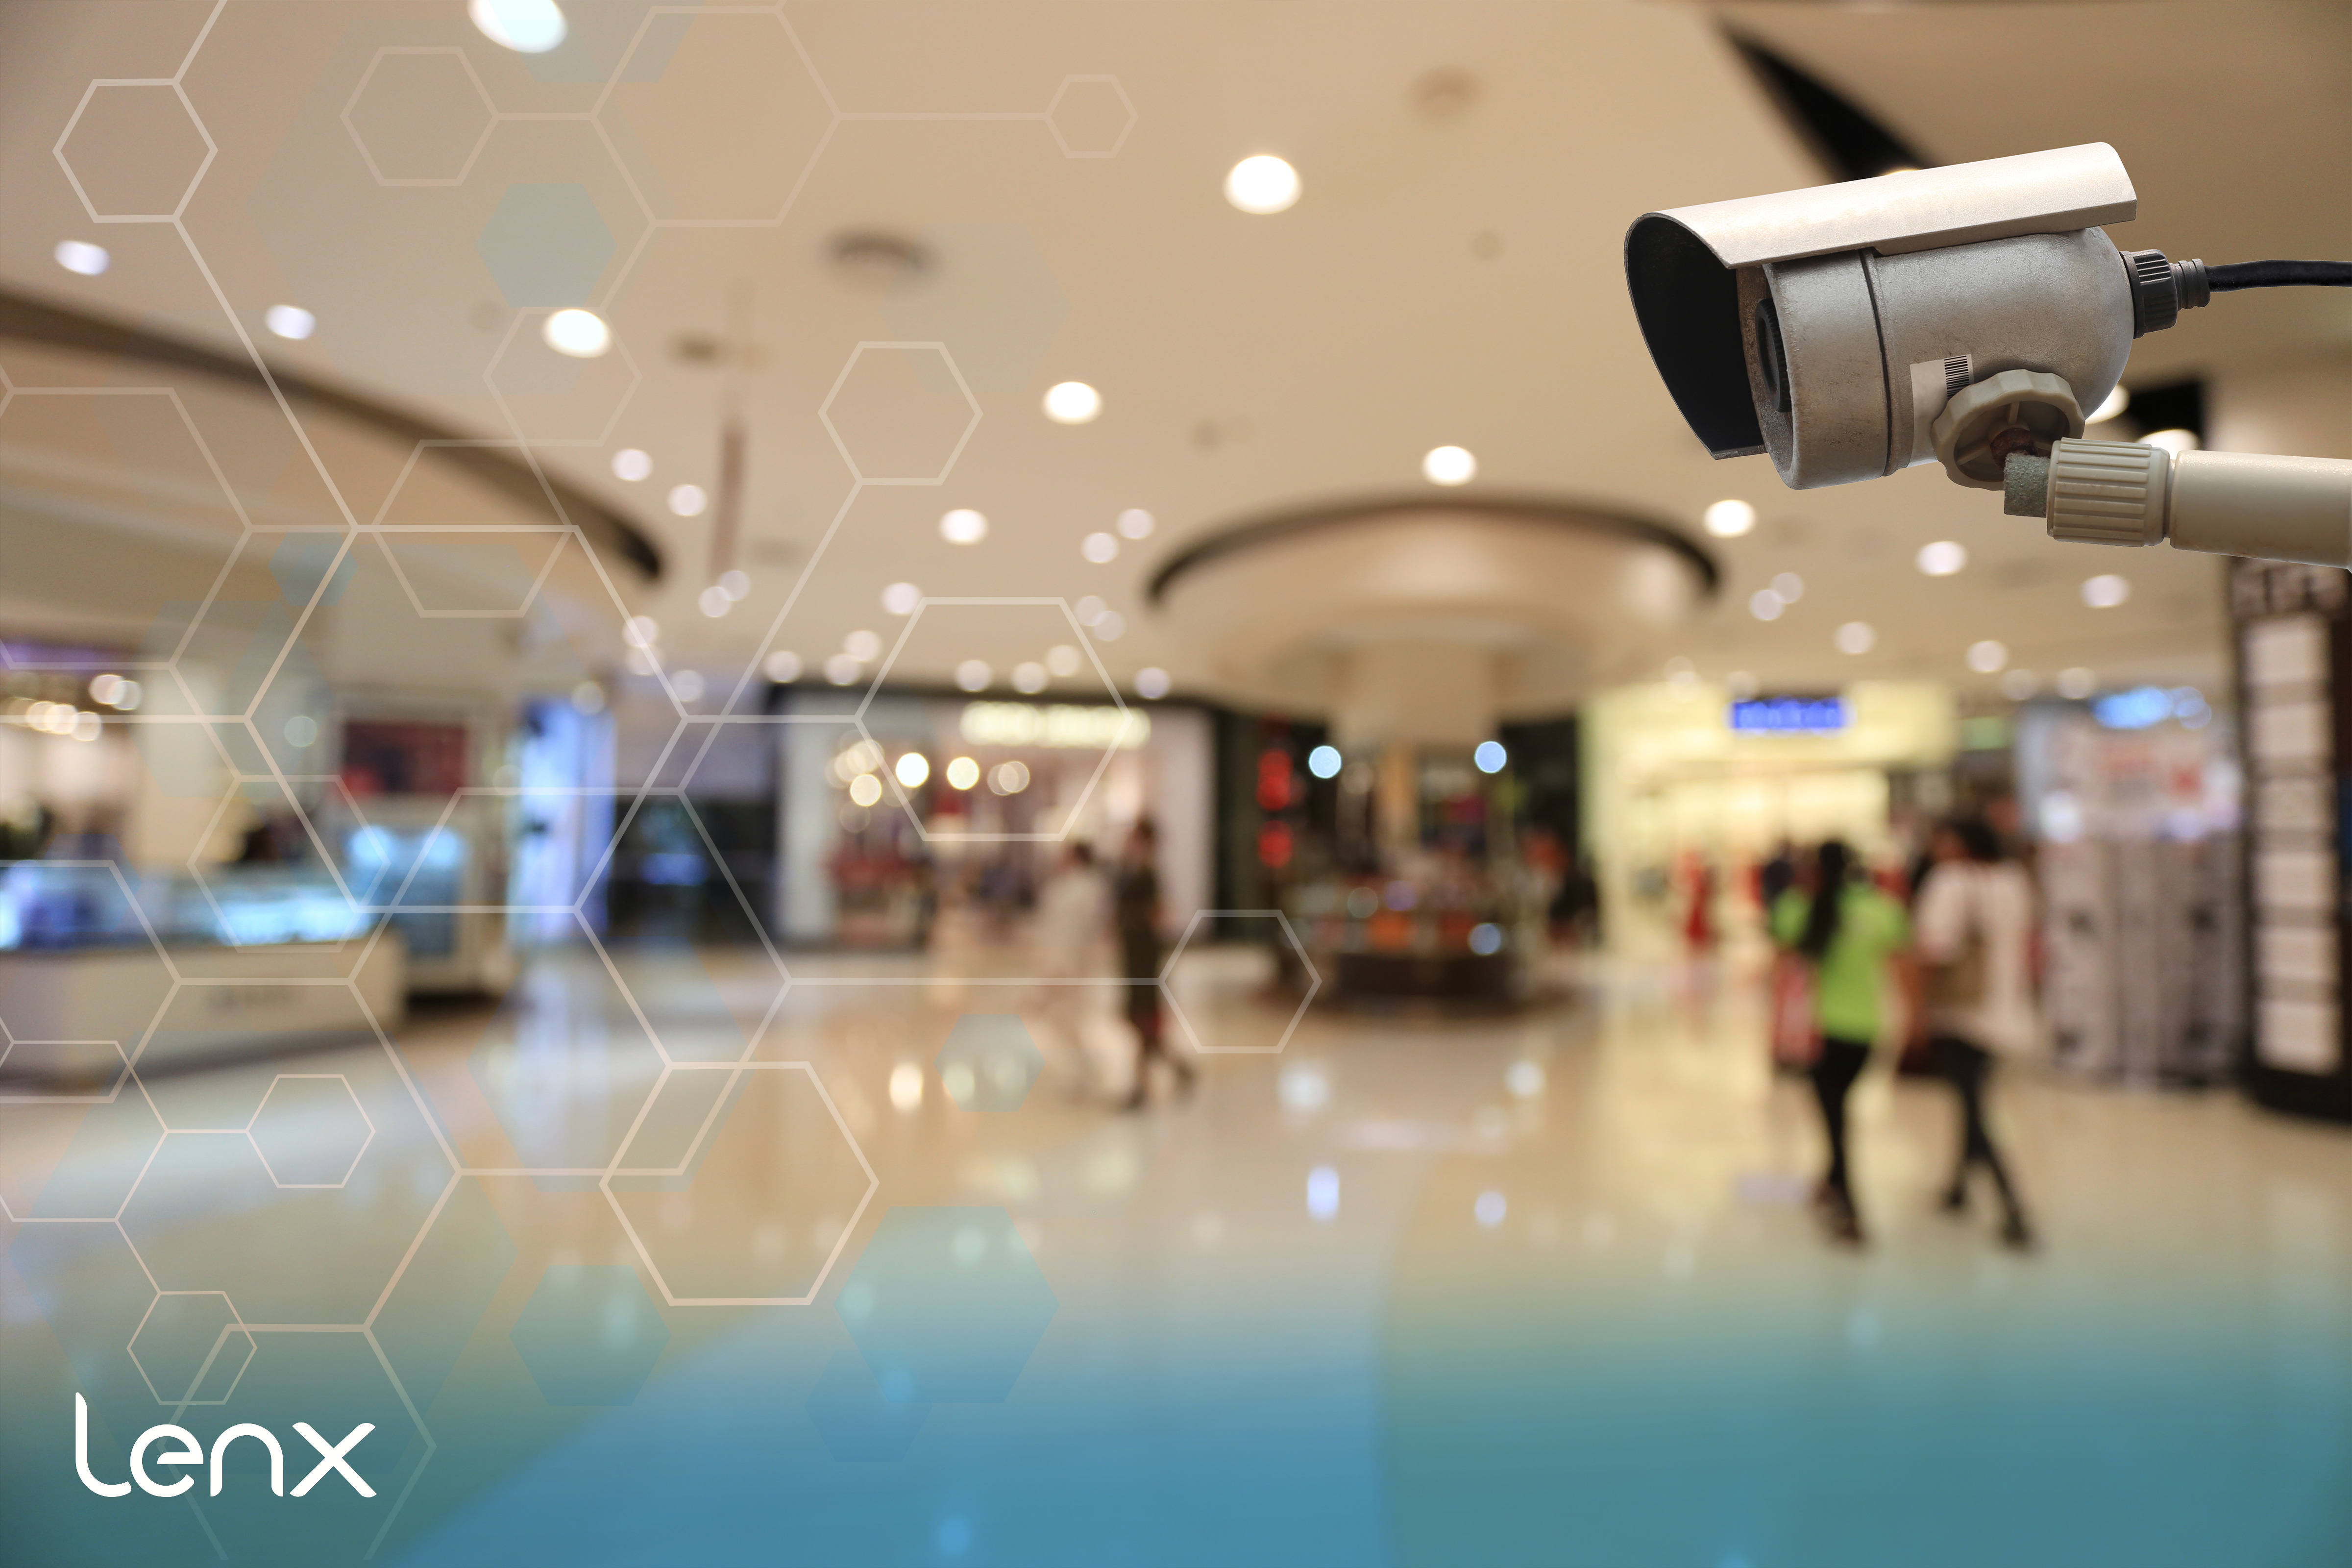 Making Sure AI Security, Active Shooter Detection Systems Can Be Used With Your Camera System